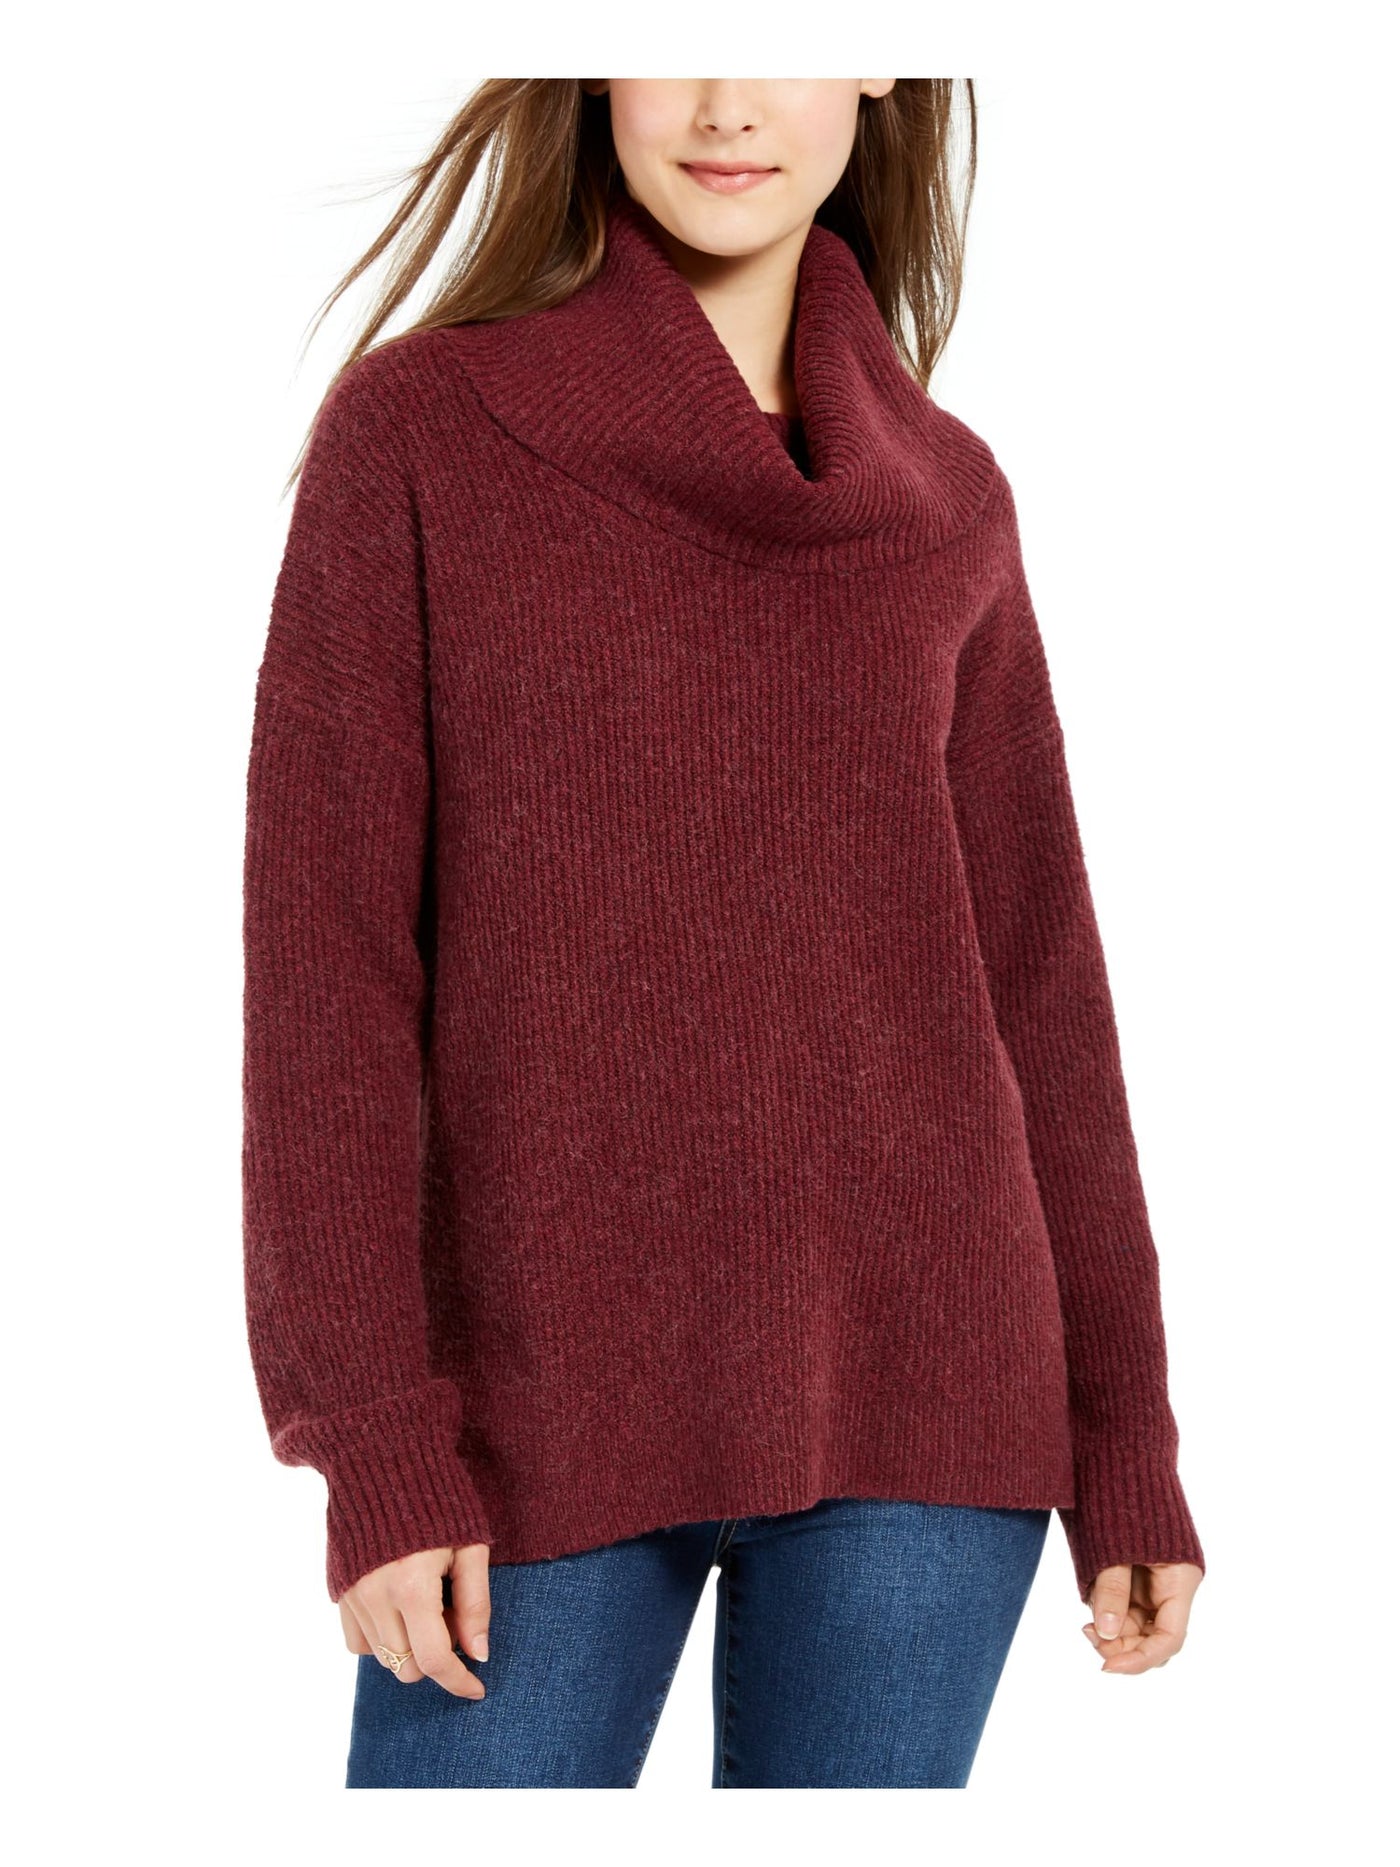 HIPPIE ROSE Womens Burgundy Ribbed Long Sleeve Cowl Neck Sweater Juniors S